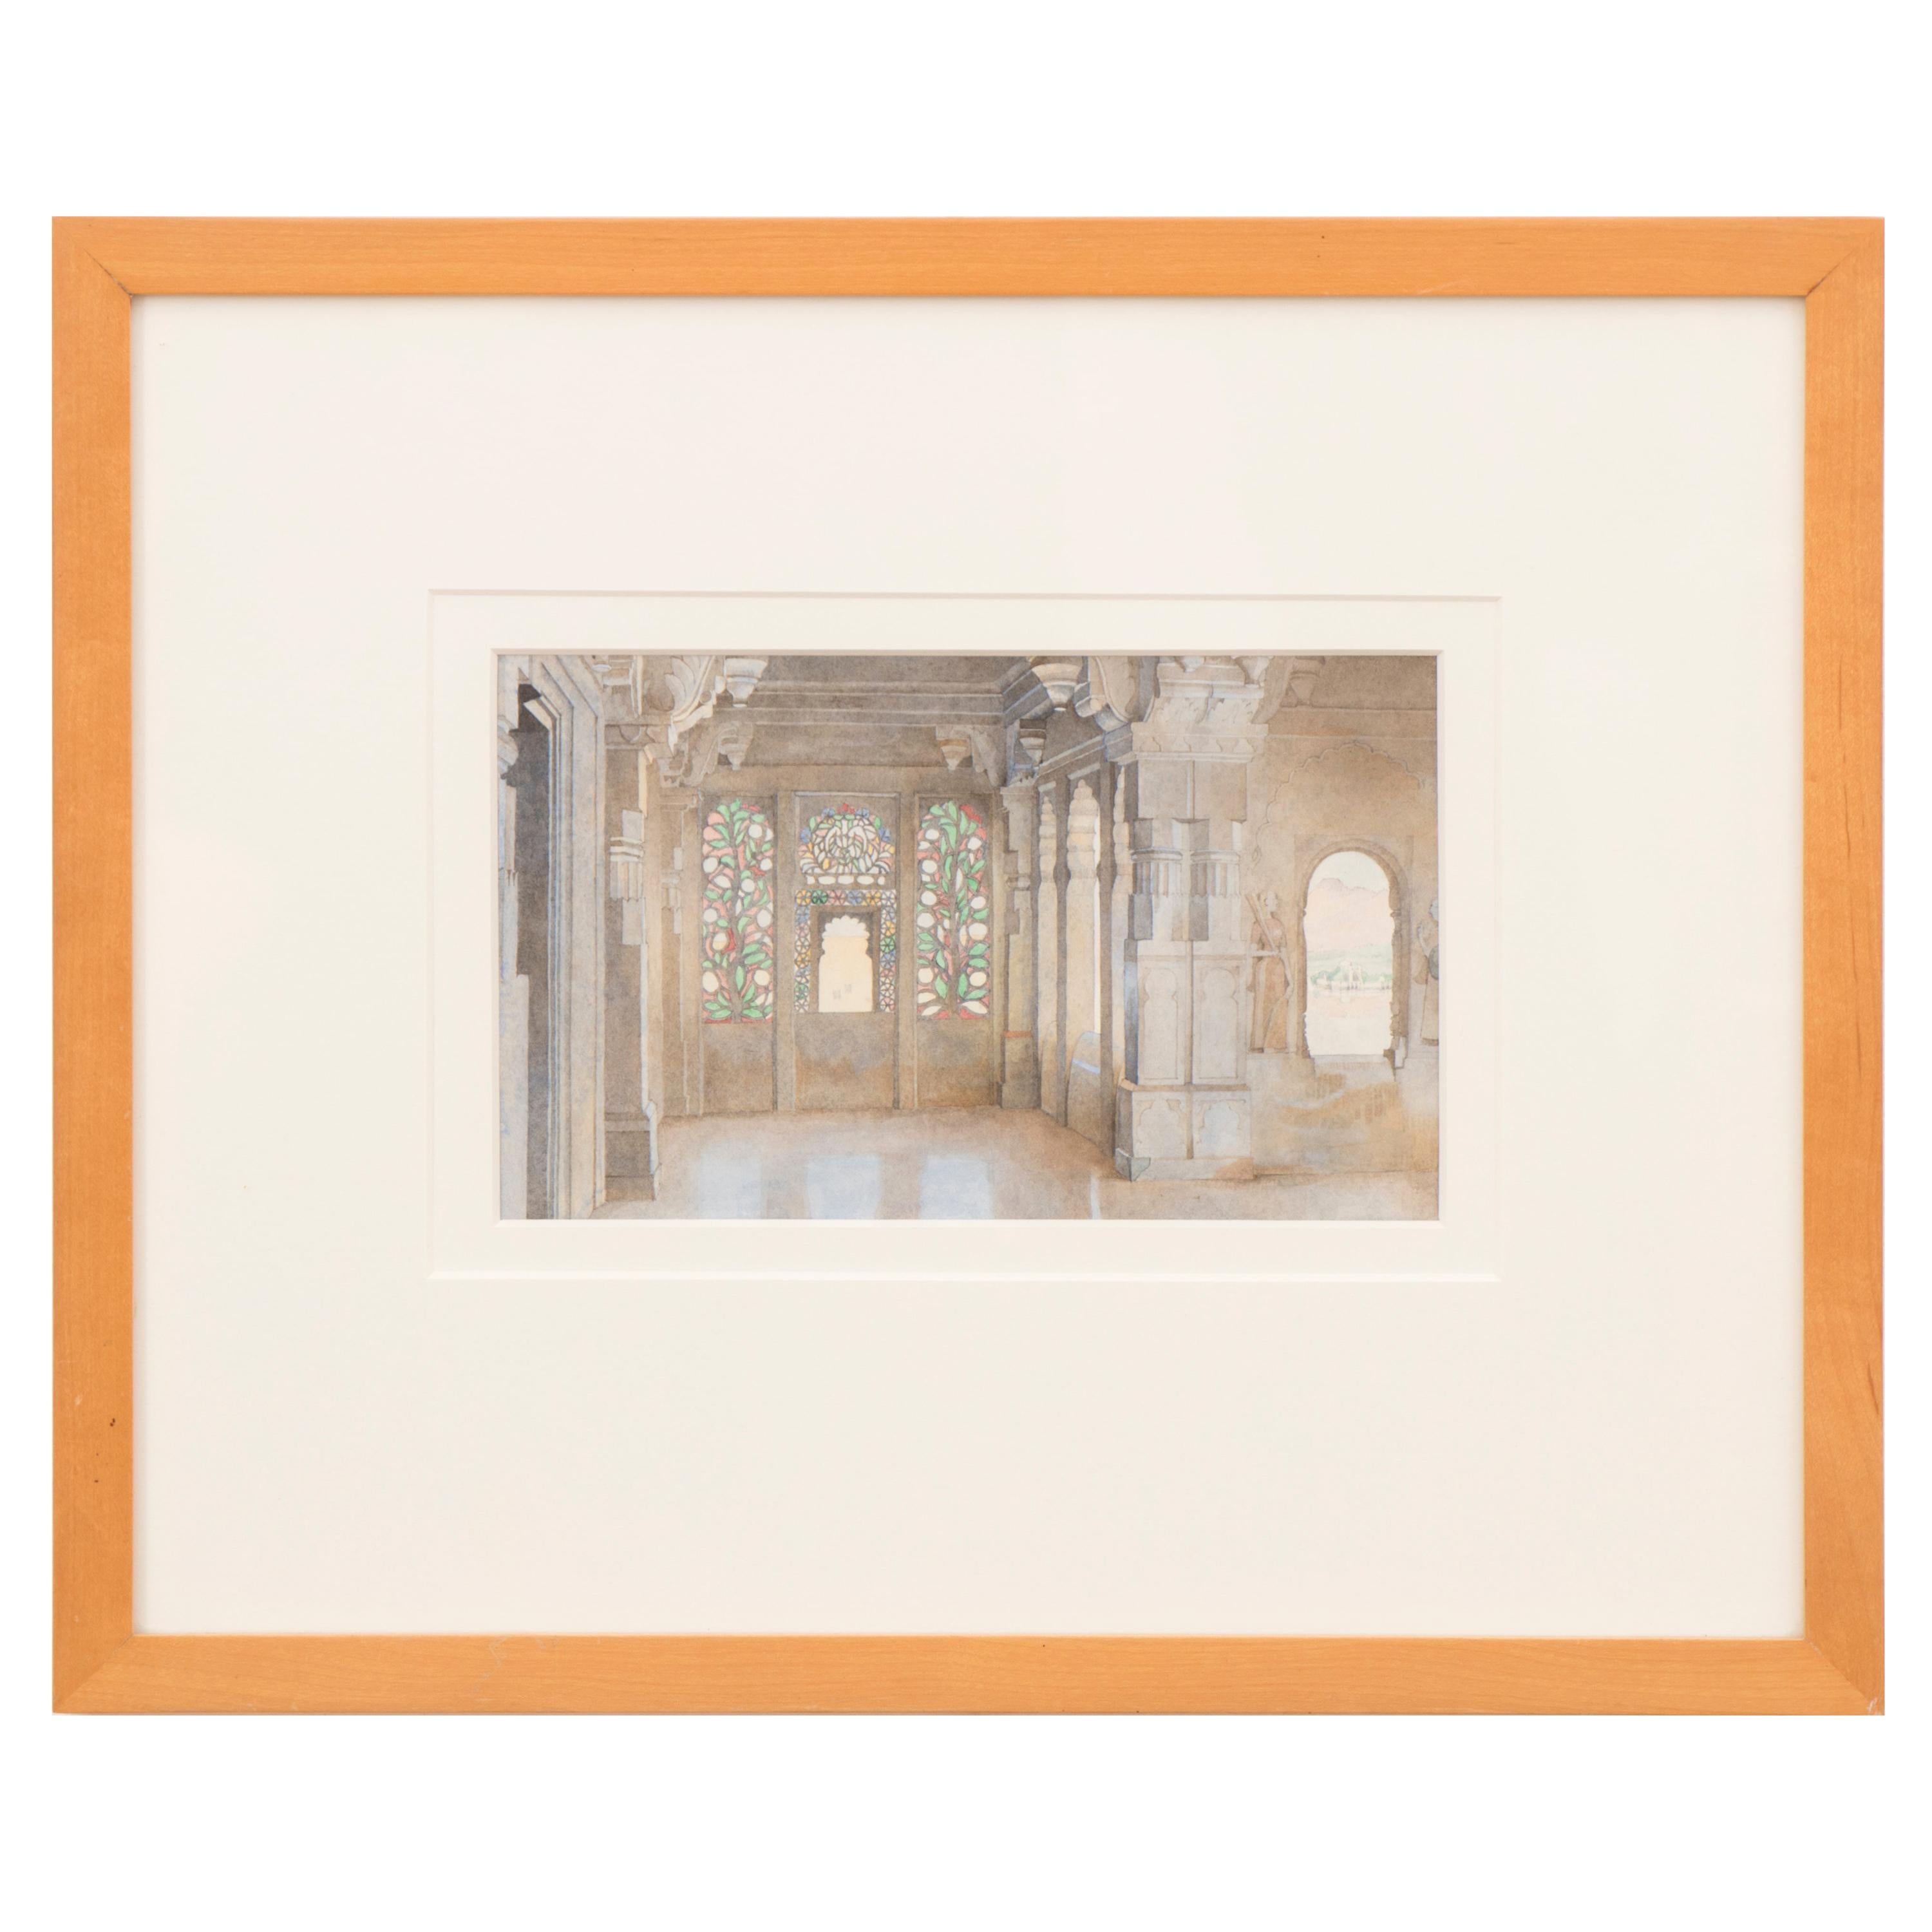 City Palace Udaipur Chandra Mahal by Artist Ceri Shields, Watercolor, 1989